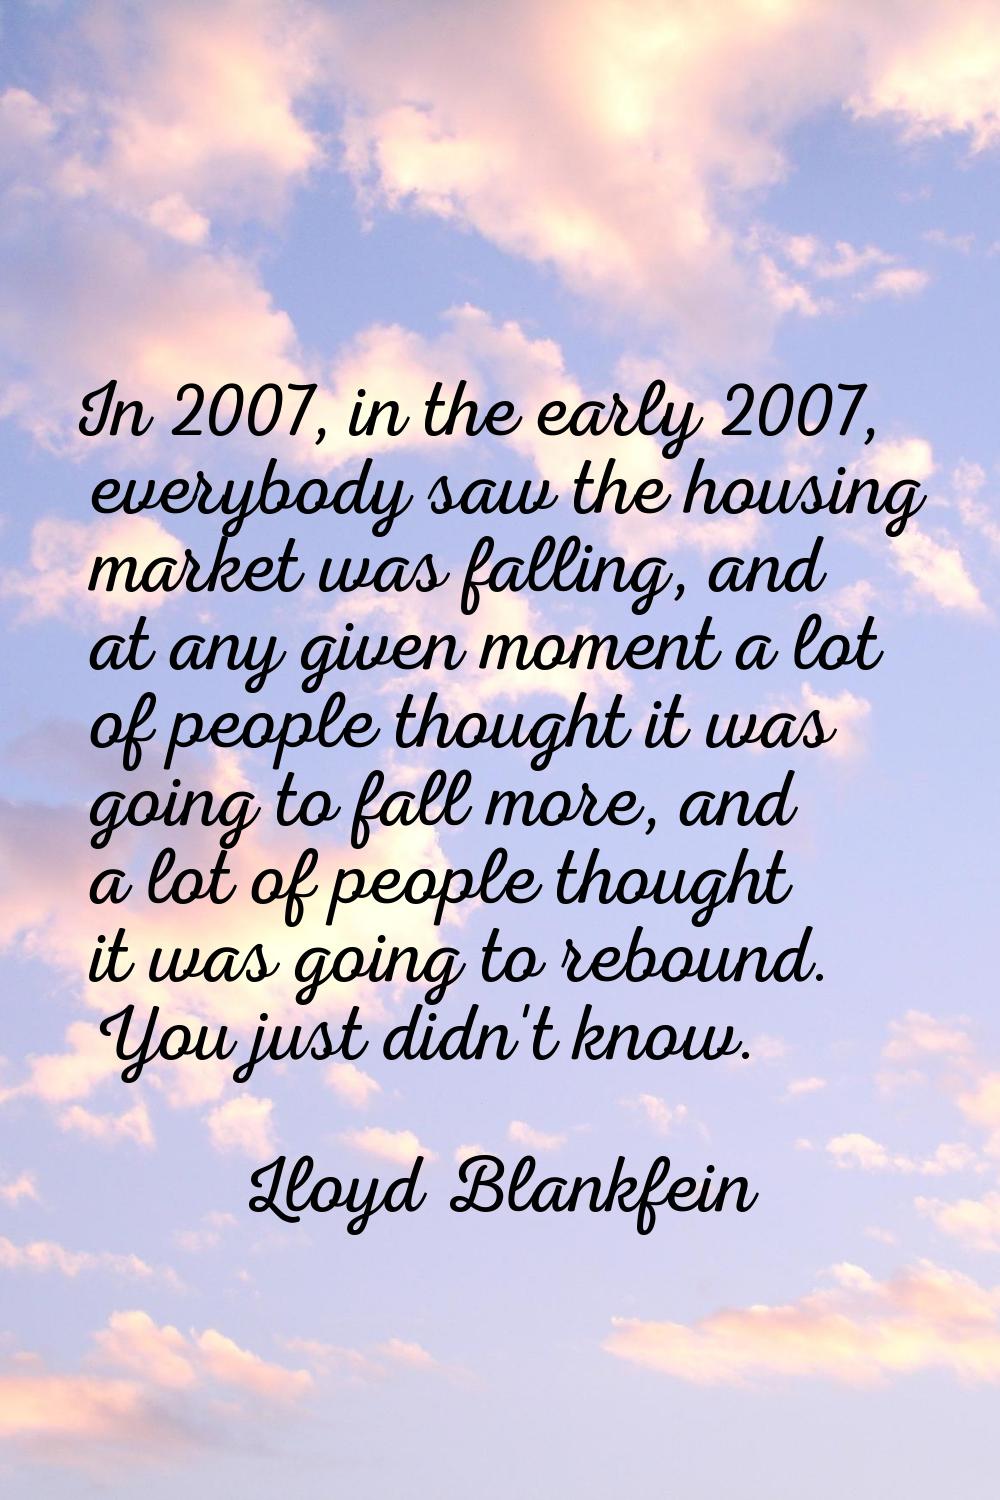 In 2007, in the early 2007, everybody saw the housing market was falling, and at any given moment a